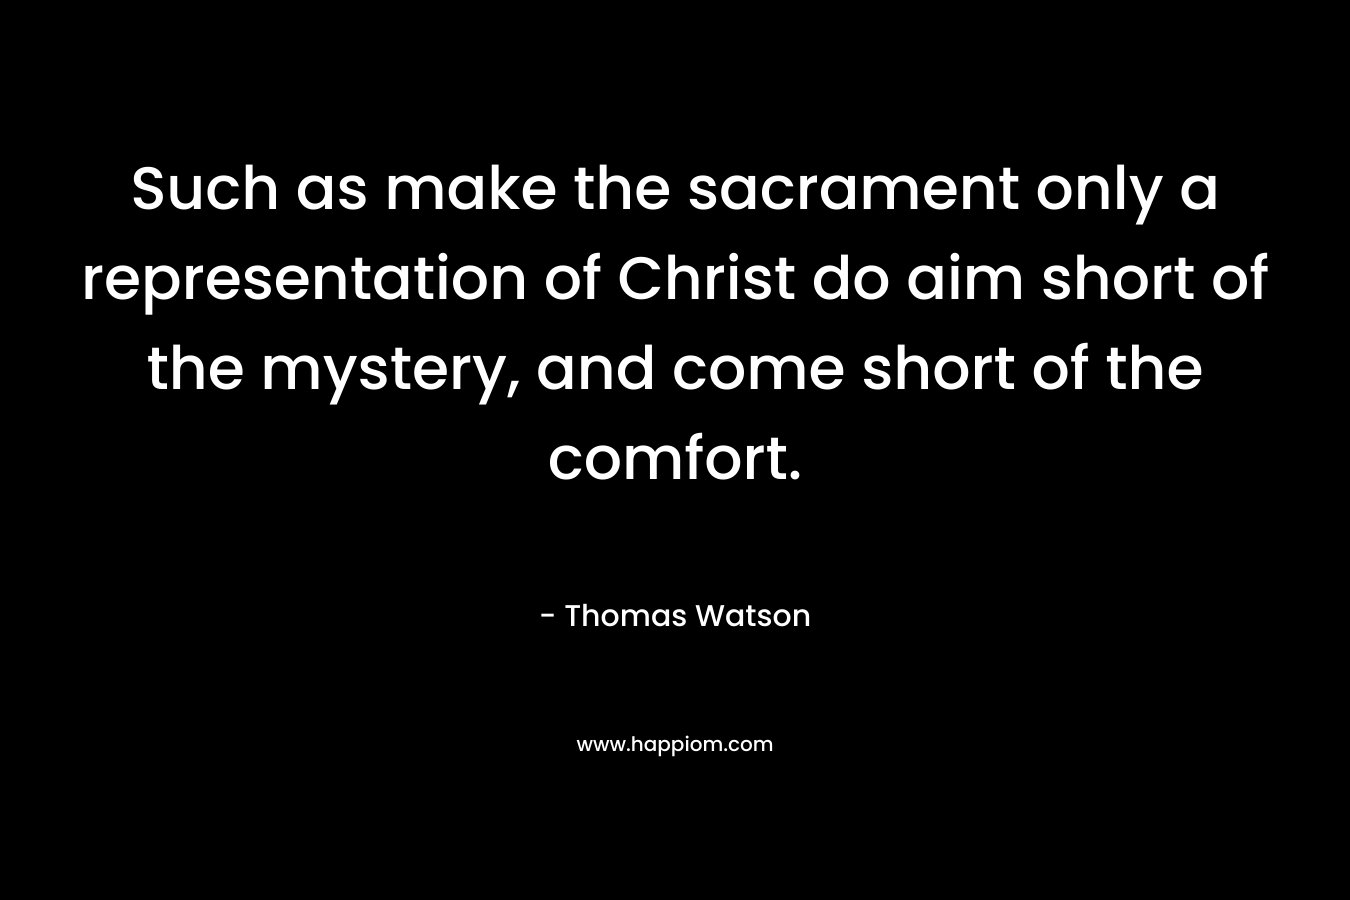 Such as make the sacrament only a representation of Christ do aim short of the mystery, and come short of the comfort. – Thomas Watson